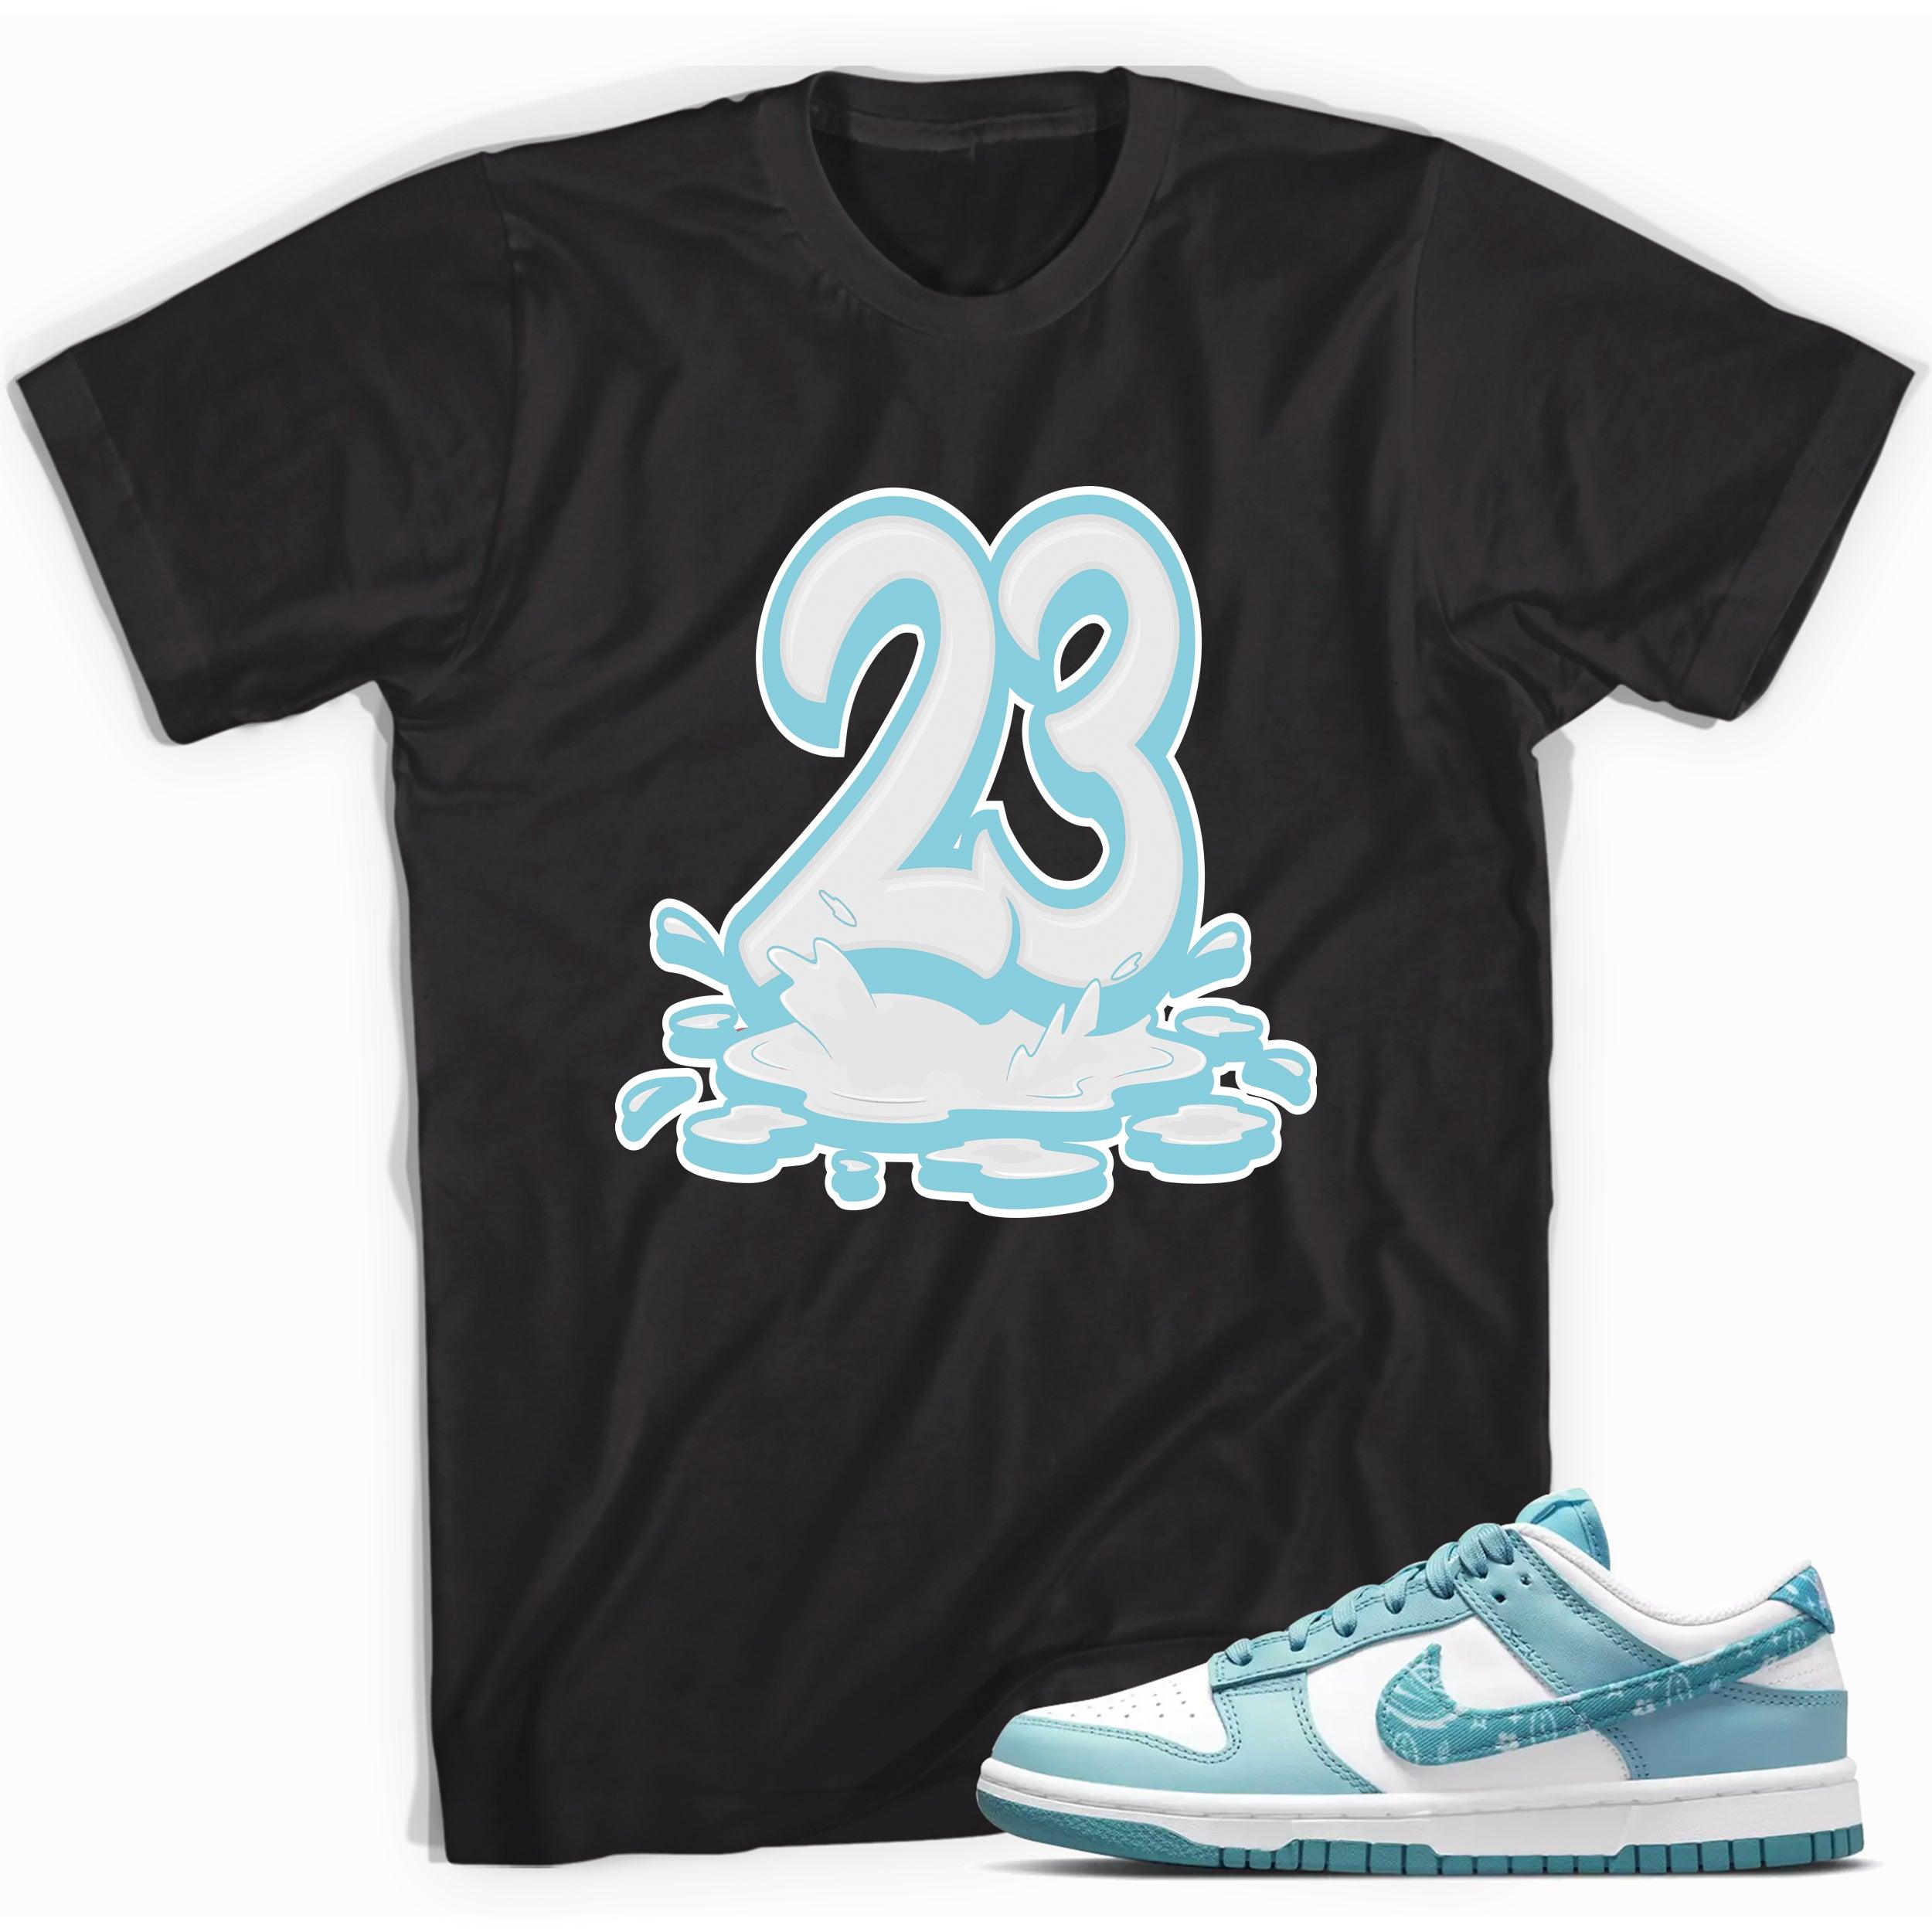 23 Melting Shirt Dunk Low Essential Paisley Pack Worn Blue photo